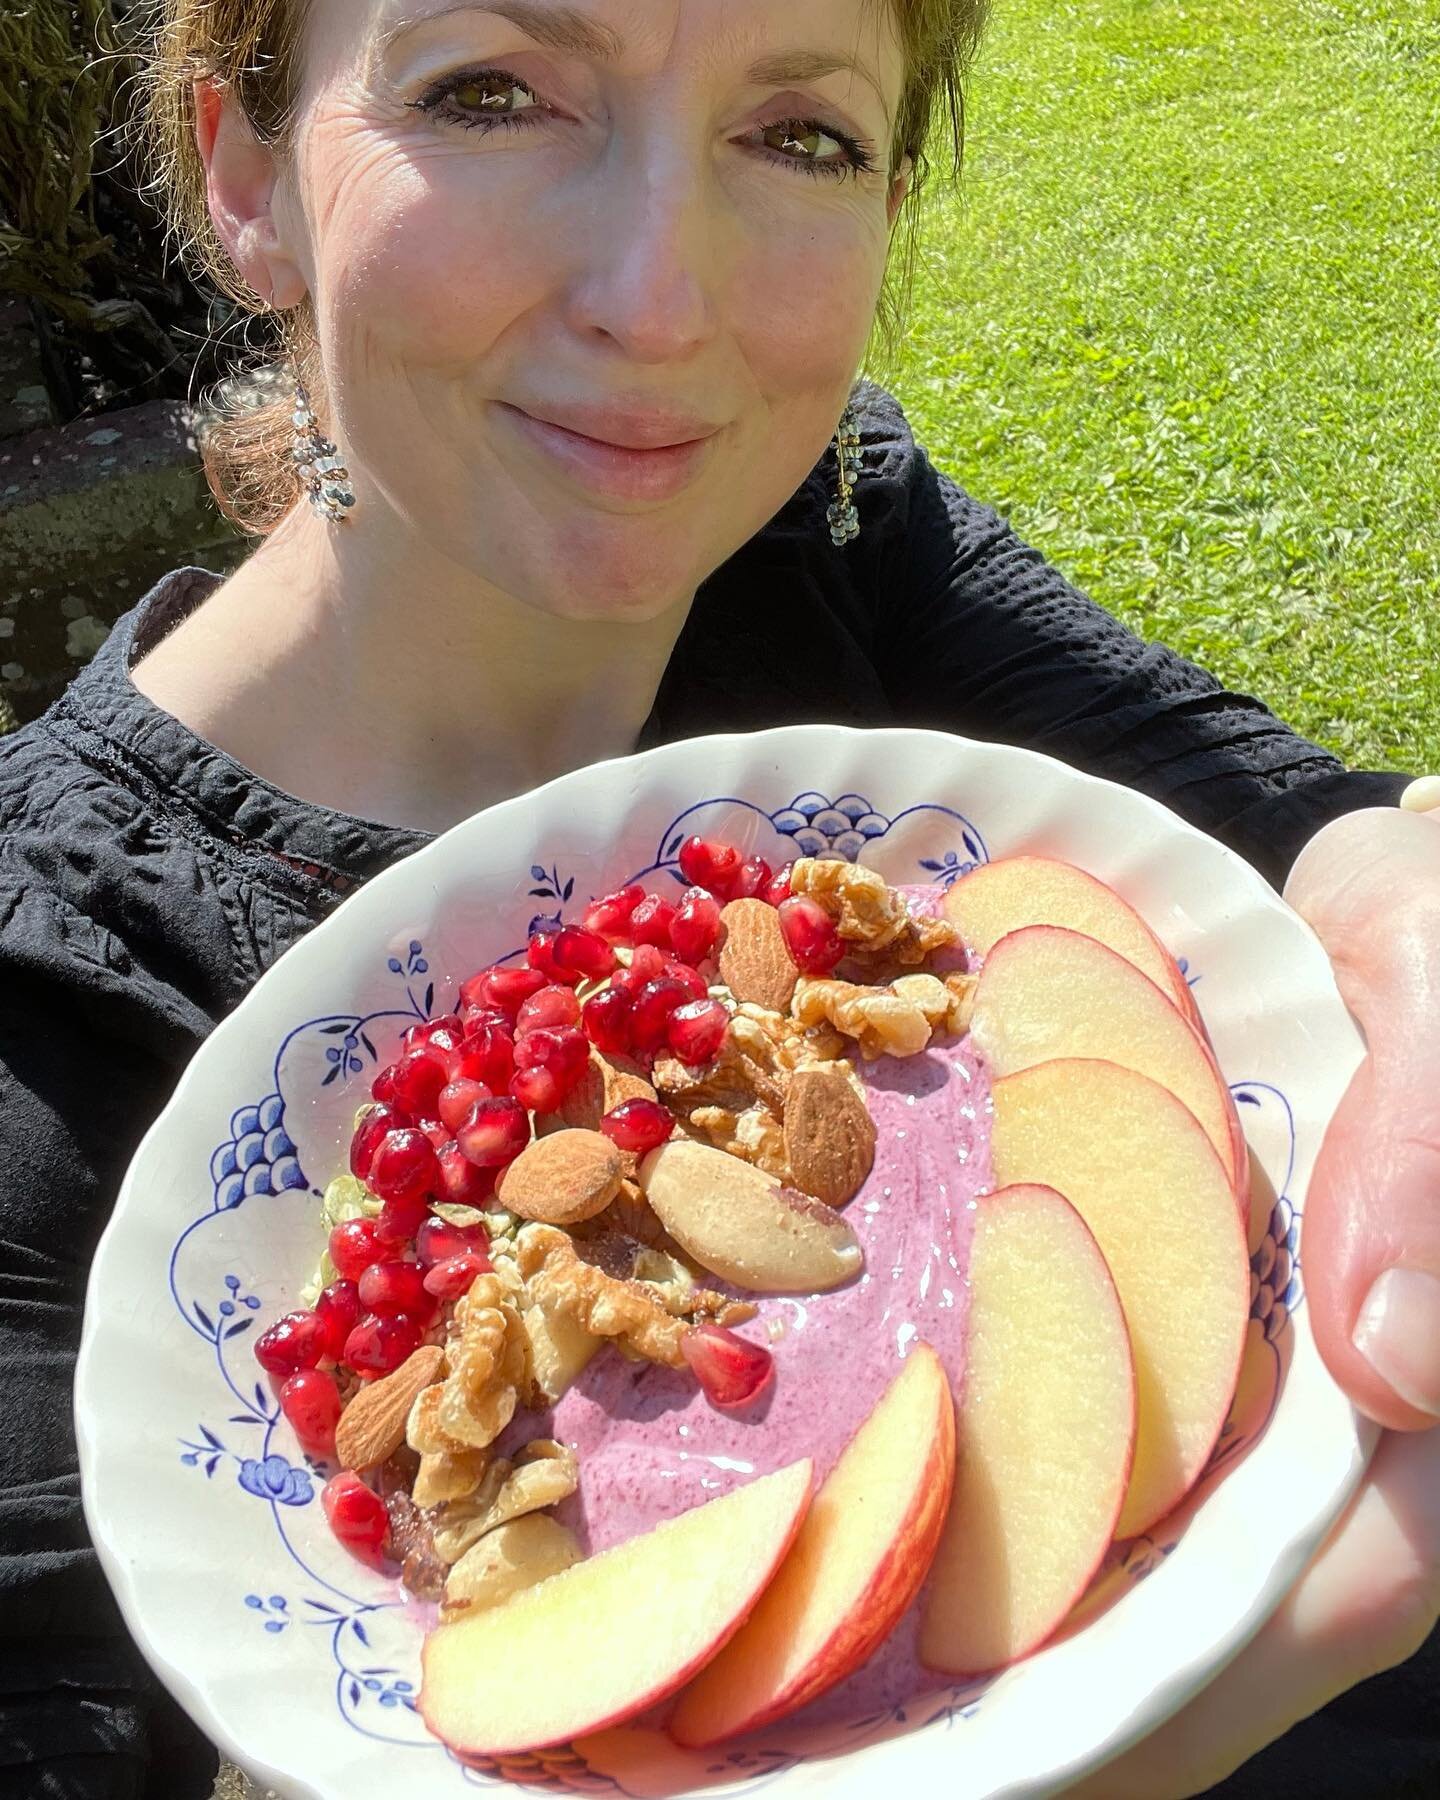 There&rsquo;s nothing better than a delicious breakfast in the sunshine.

I had:

Full fat Greek yoghurt jazzed up with powdered wild blueberries, wild lingonberries and blackberries (giving that gorgeous purple colour).

Plus a red apple, walnuts, p